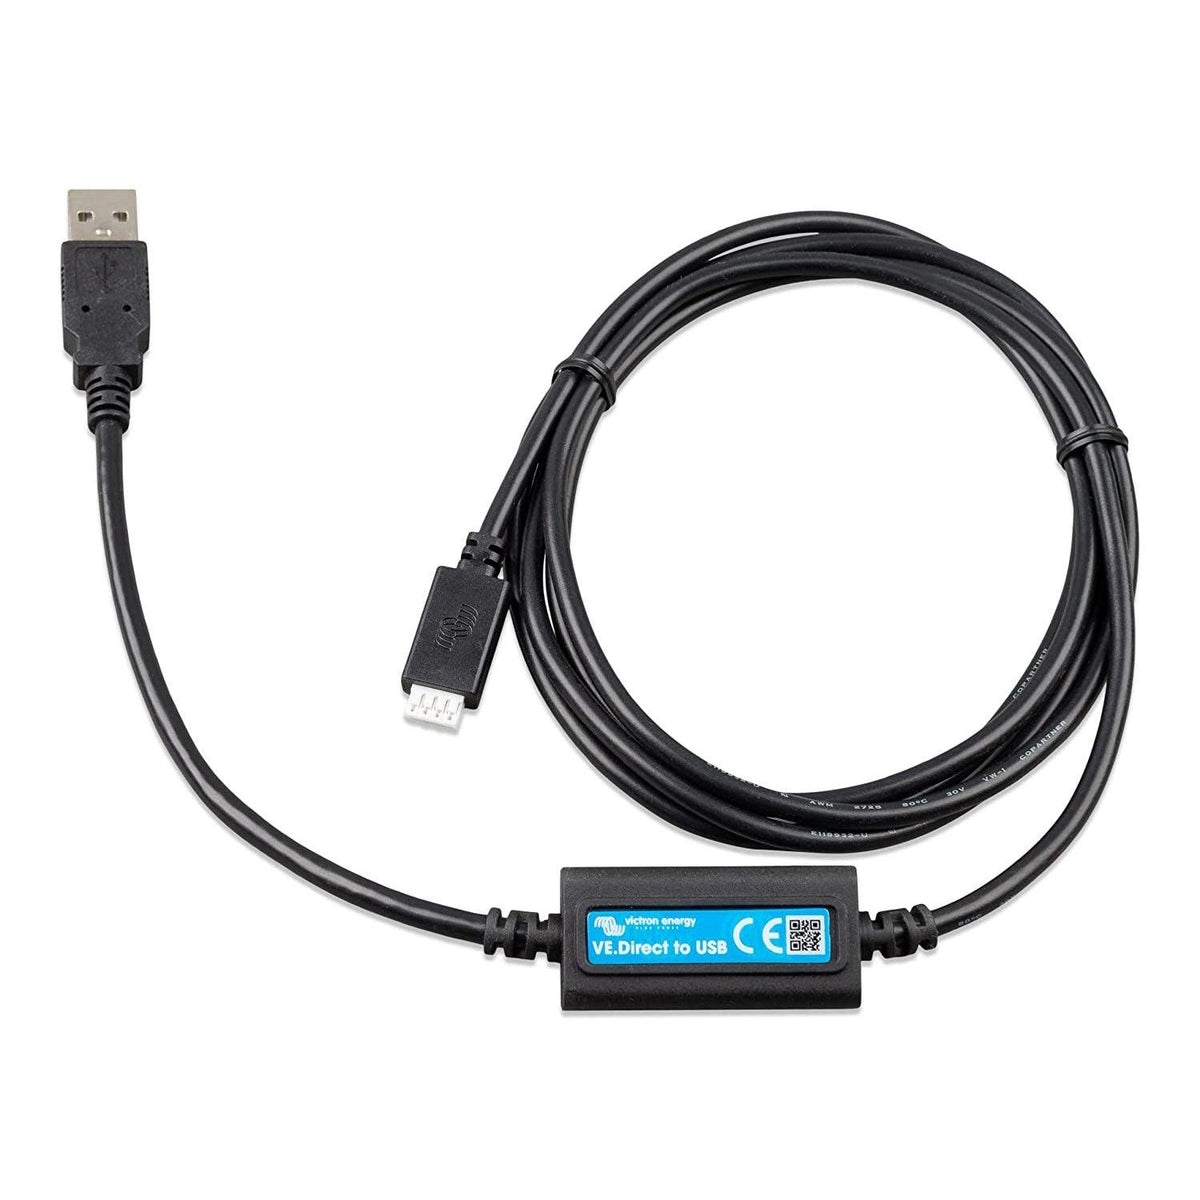 Victron VE.Direct to USB interface - ASS030530010 - VoltaconSolar